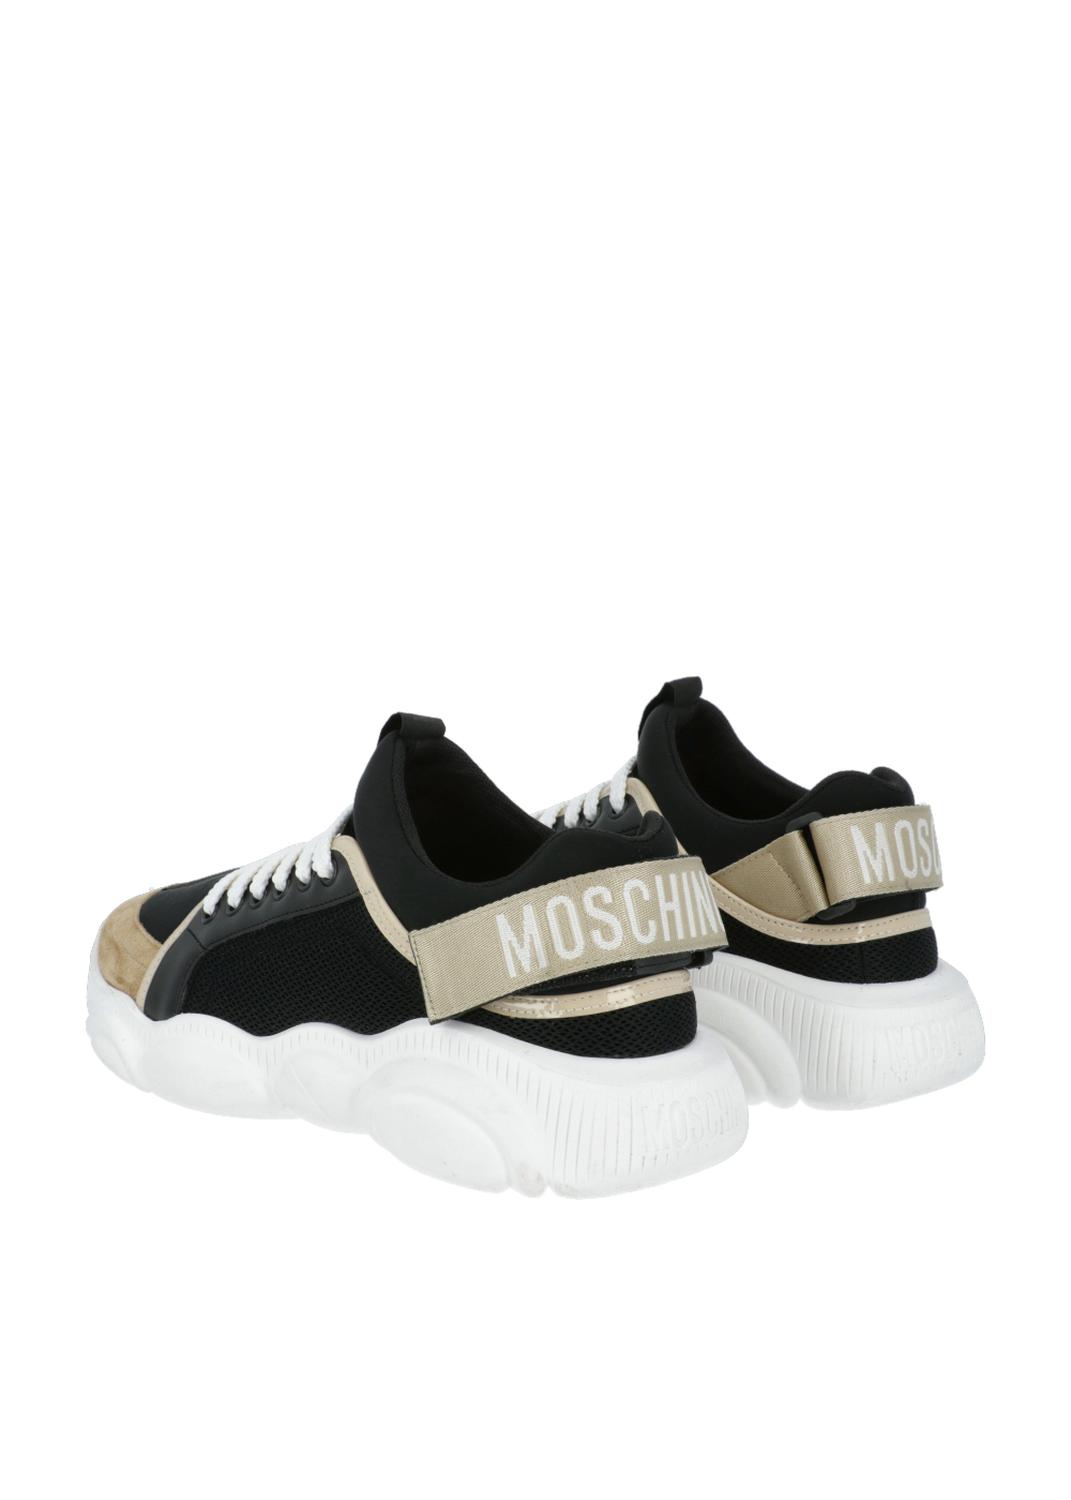 Moschino tenis Teddy MSC-MB15133 - LOUDER Lifestyle